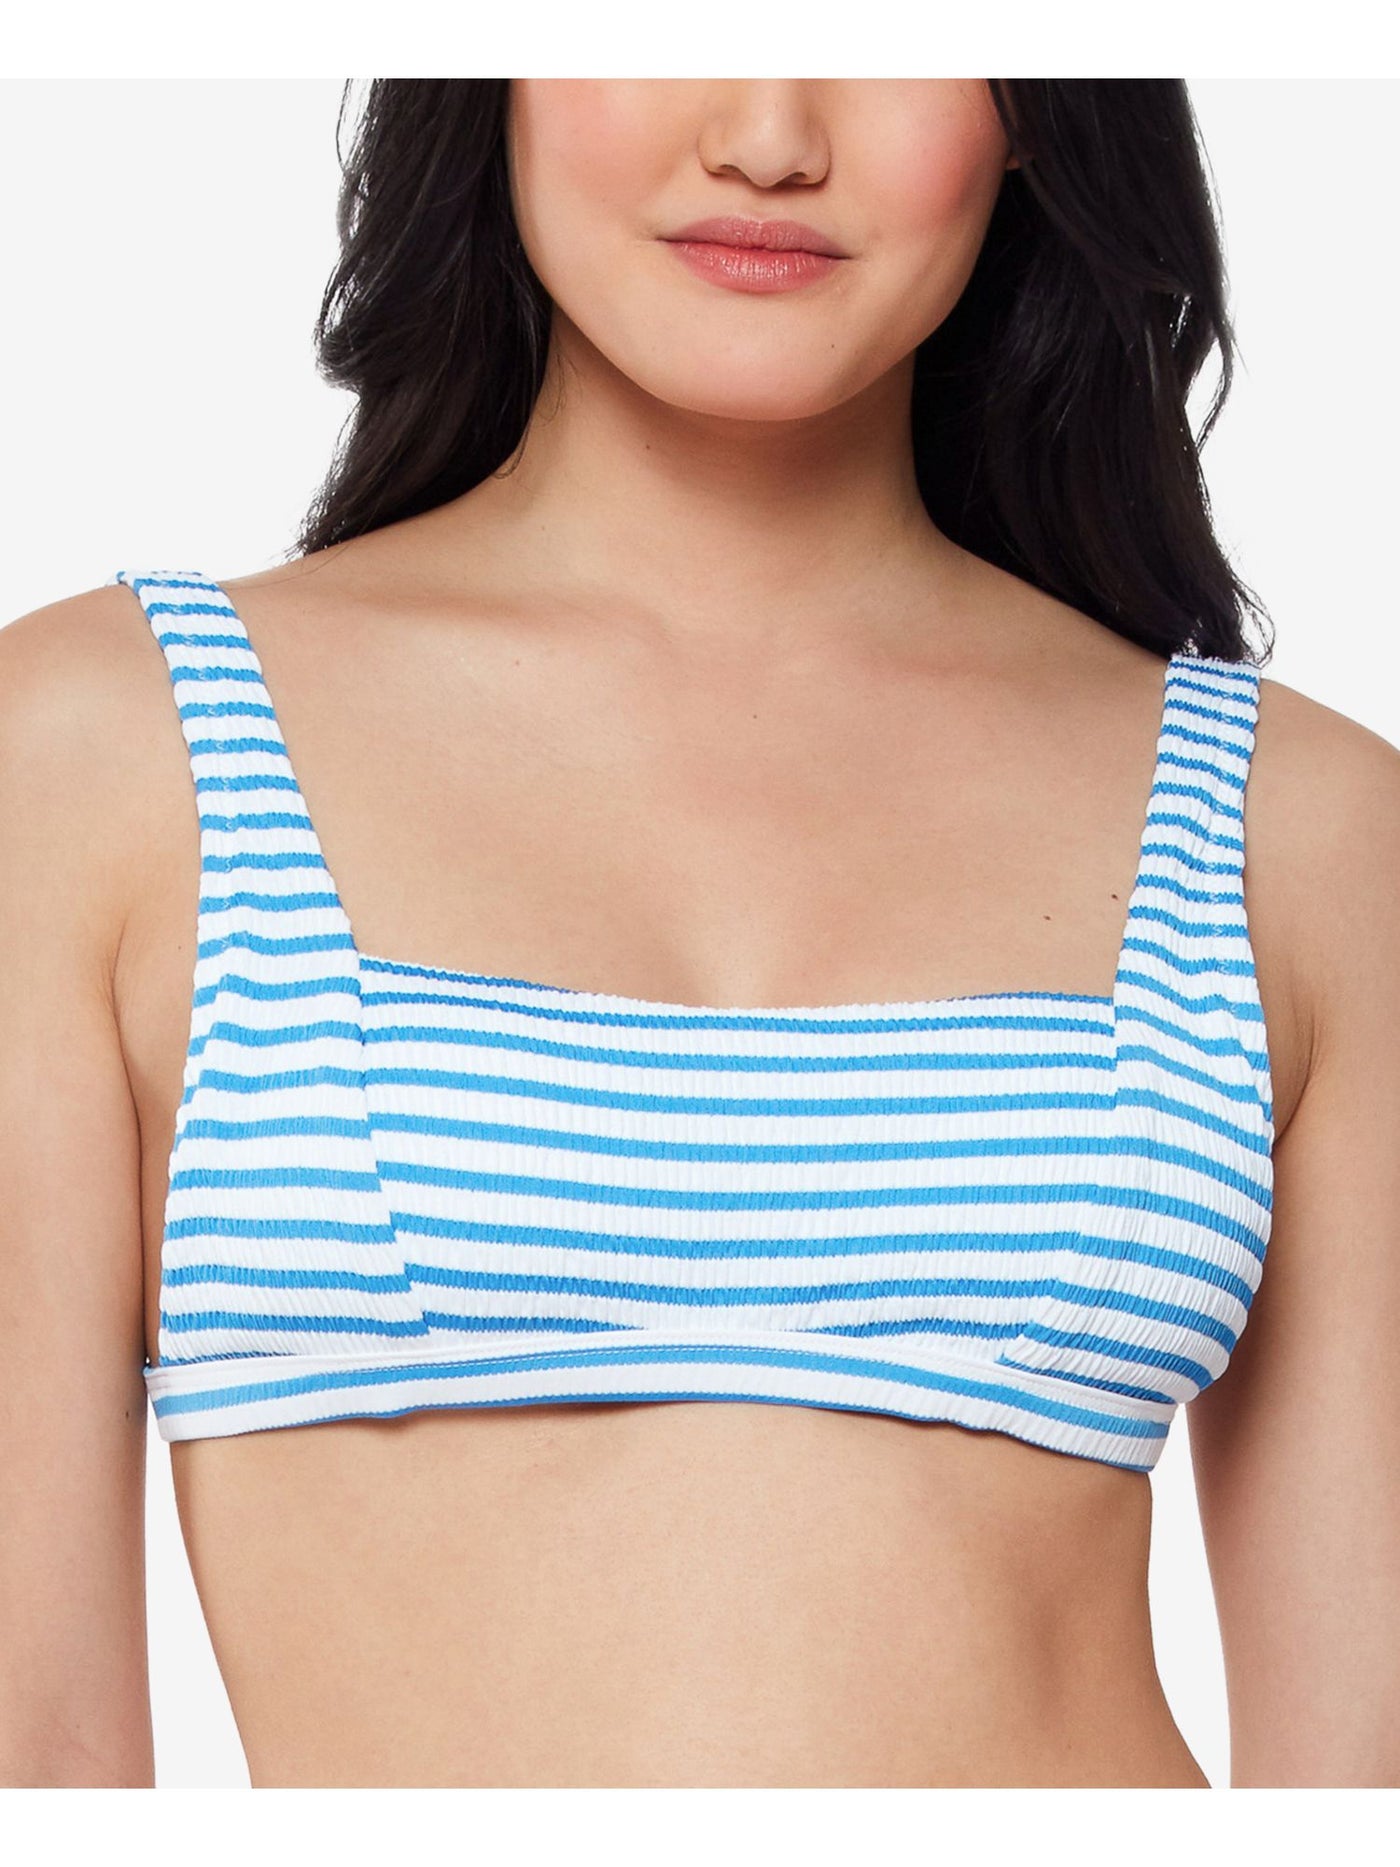 JESSICA SIMPSON Women's White Striped Stretch Removable Cups Tie Textured Adjustable Square Neck Swimsuit Top M